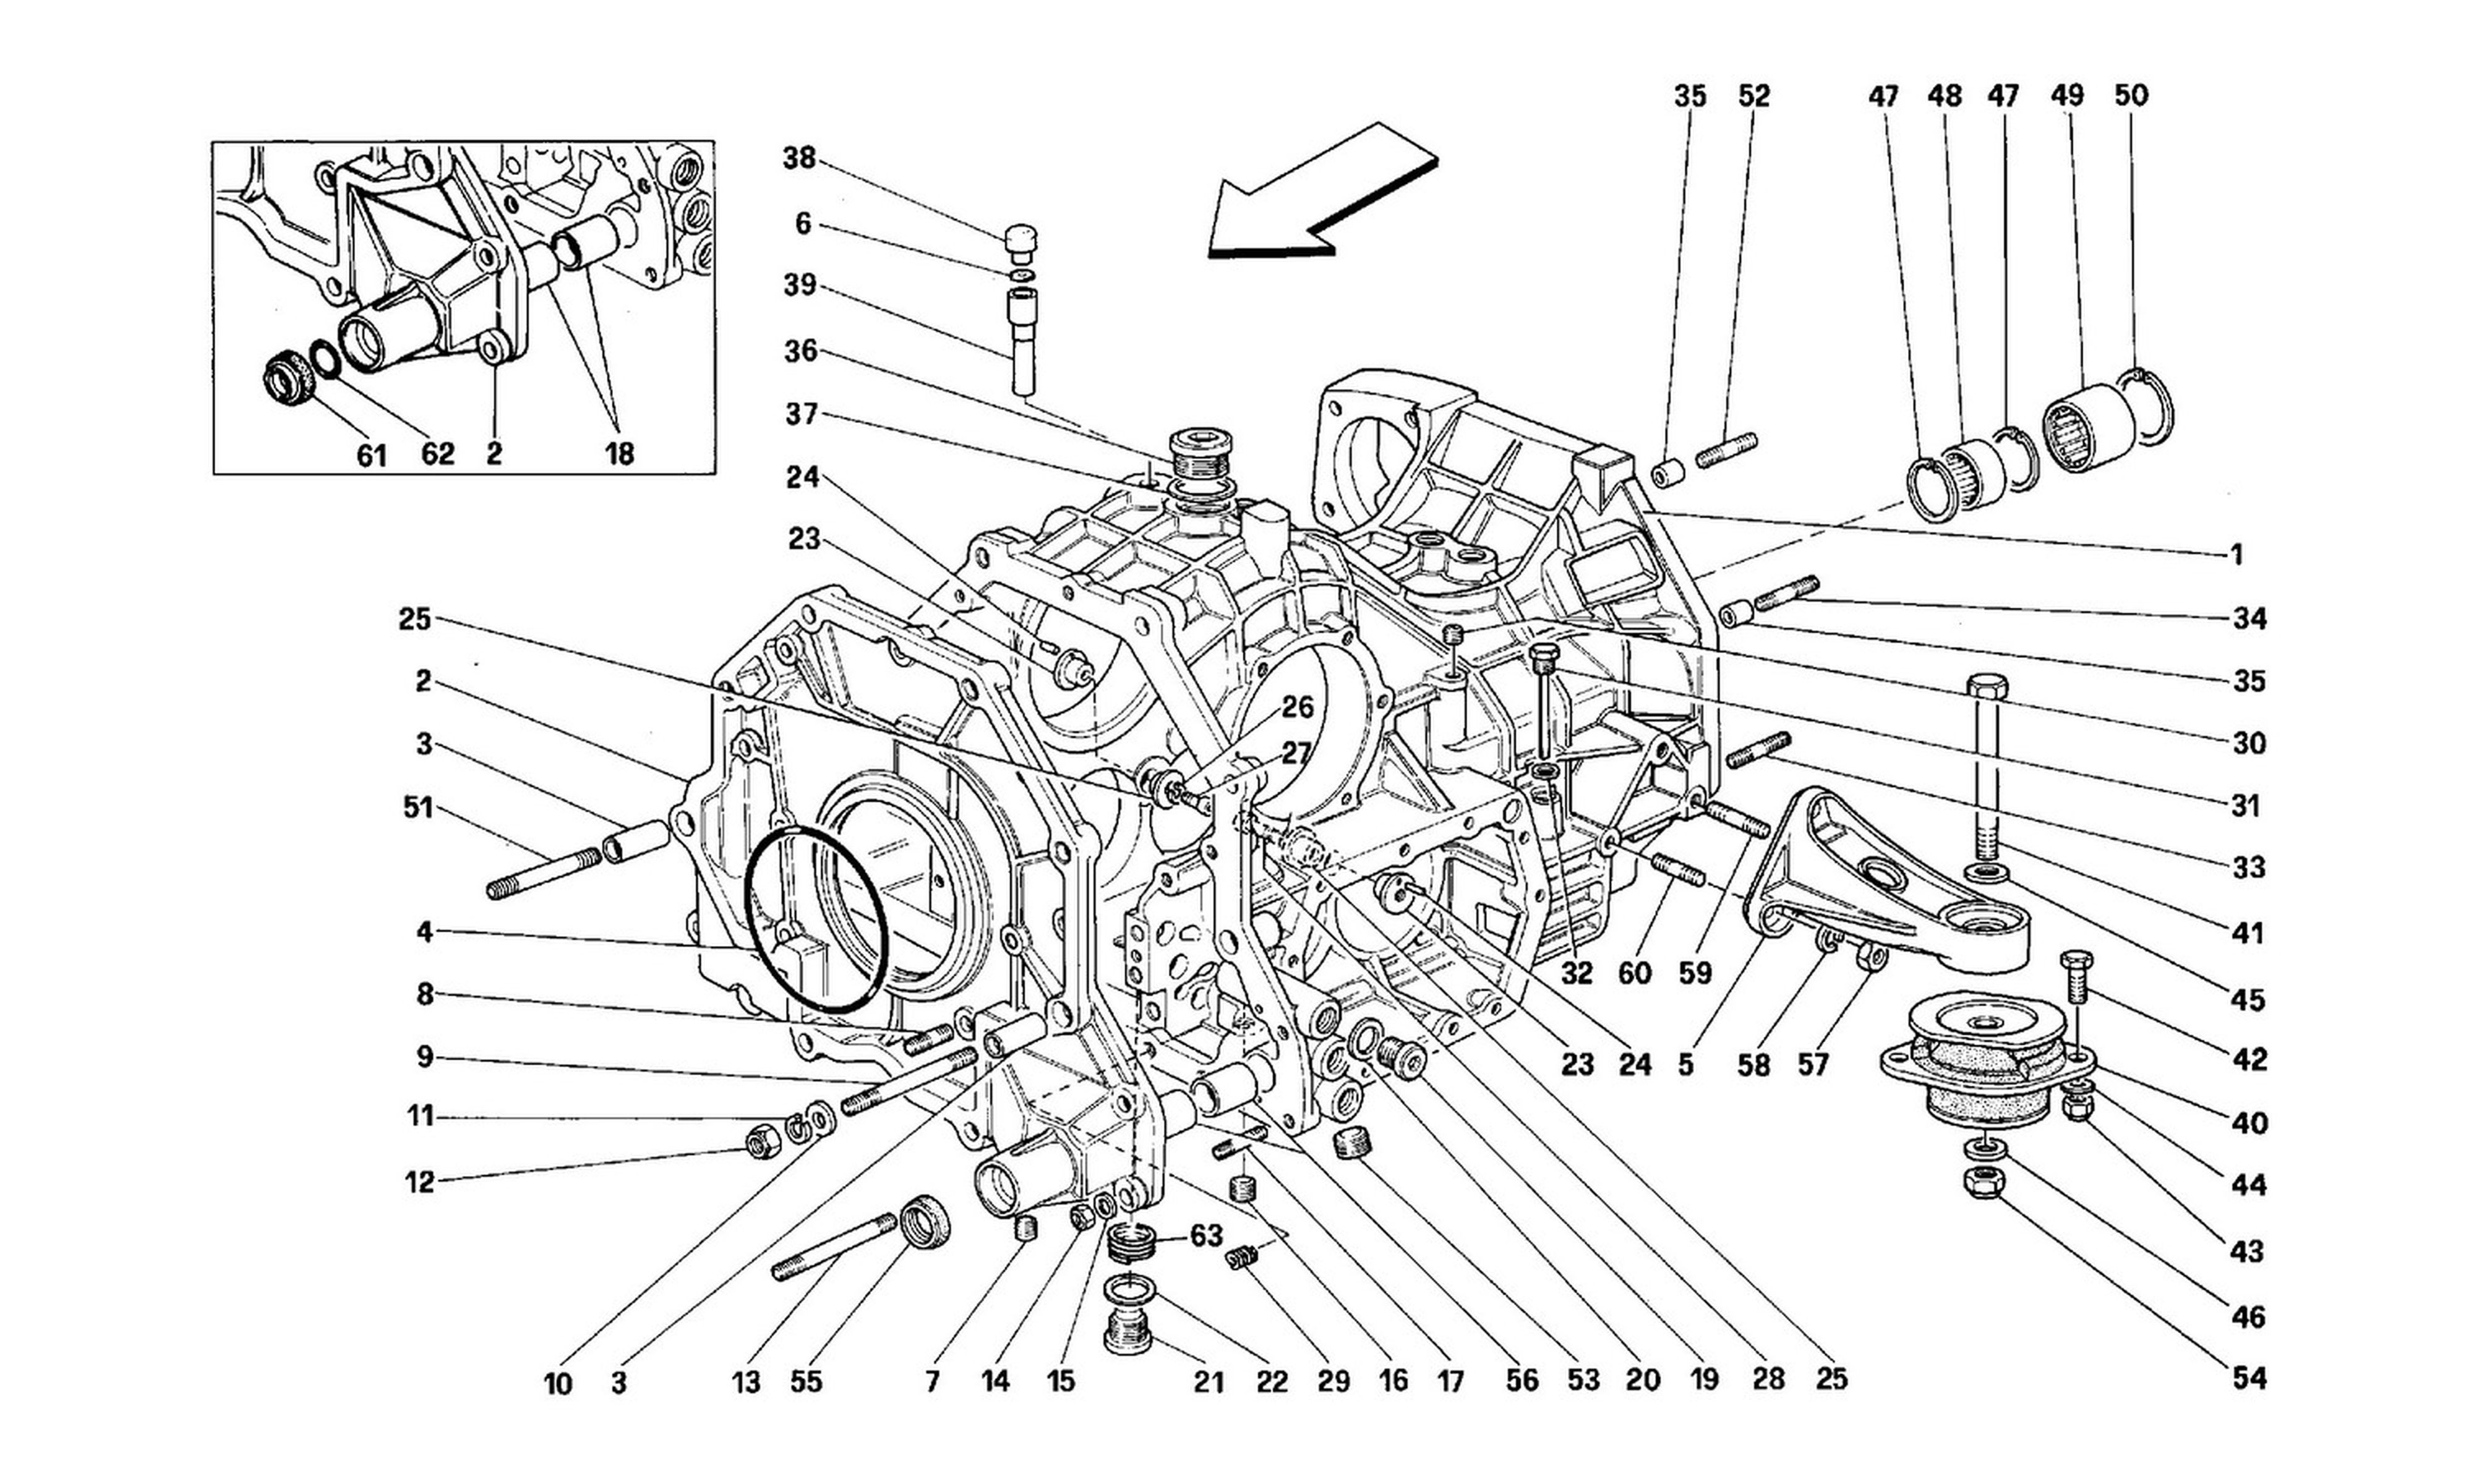 Schematic: Gearbox Housing And Interm. Casing -Valid For Cars With 4P